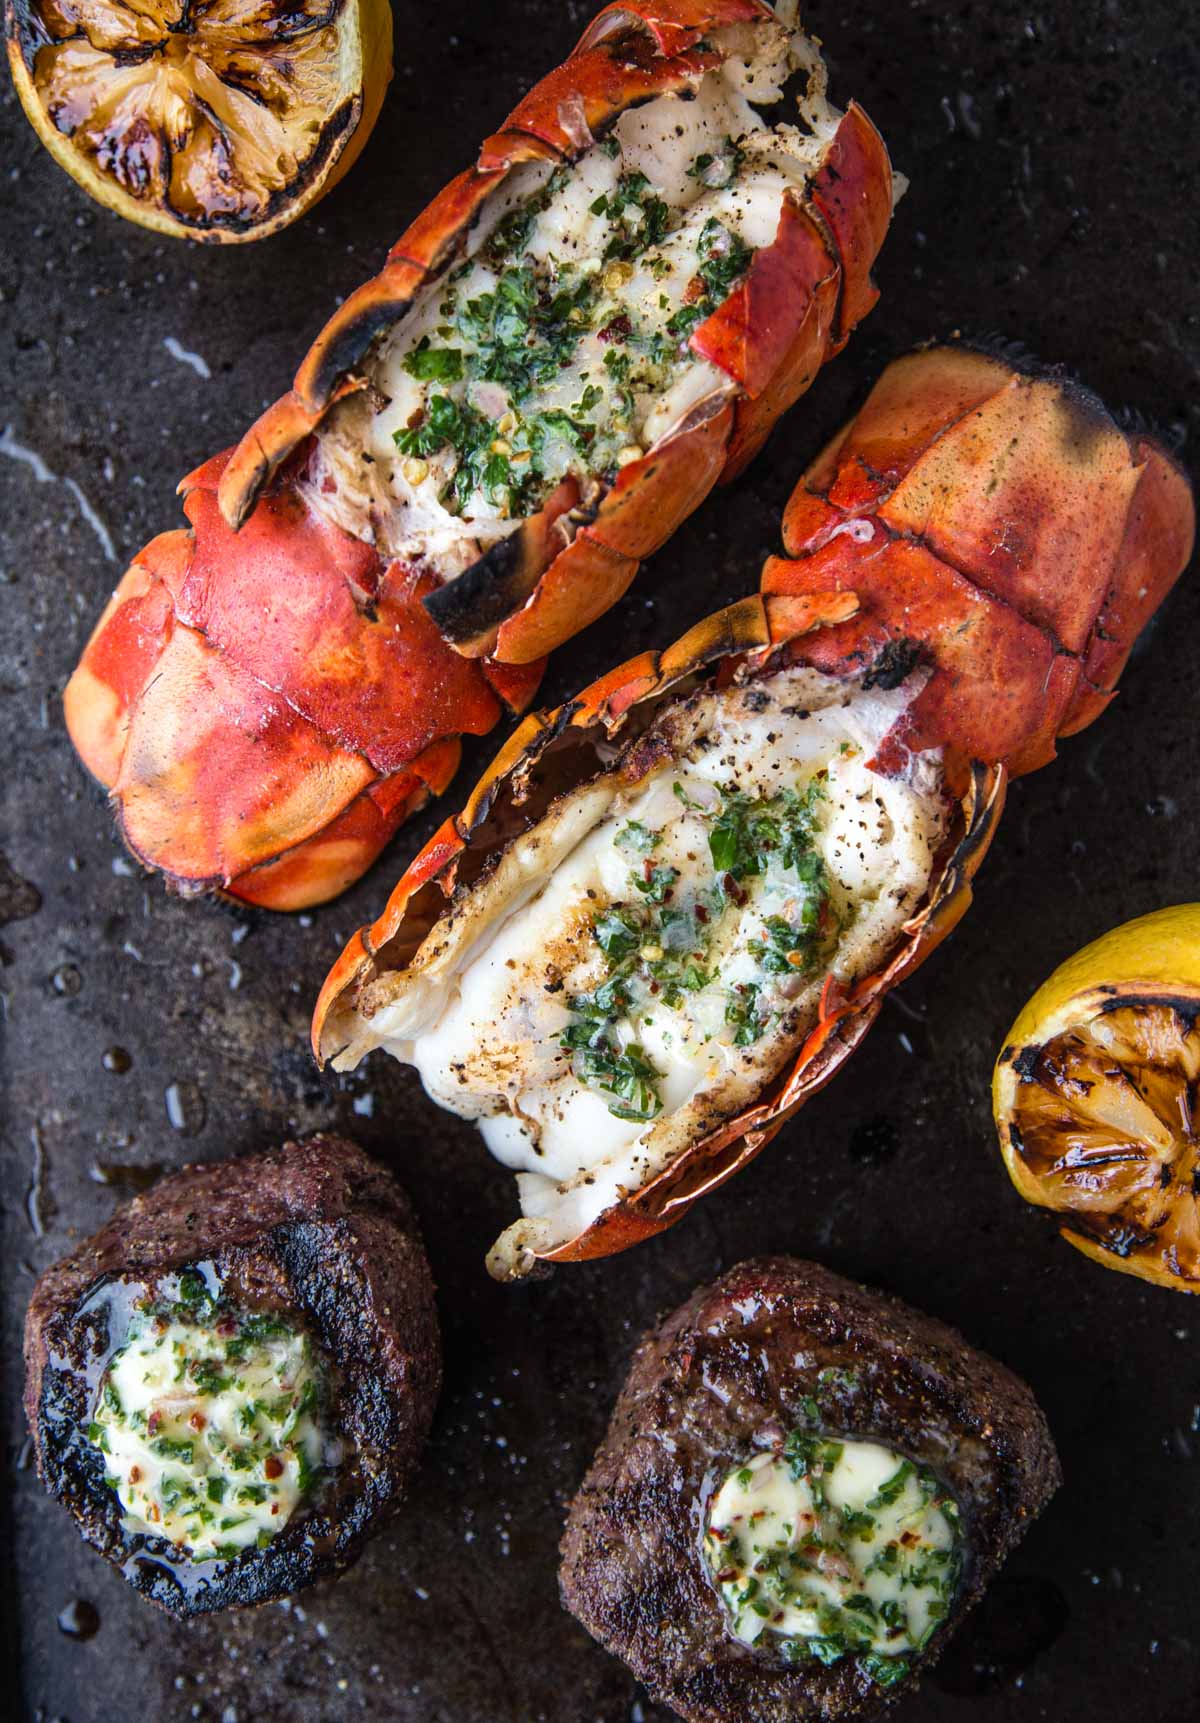 Two Grilled Lobster Tails and two Grilled Filet Mignon resting on a platter